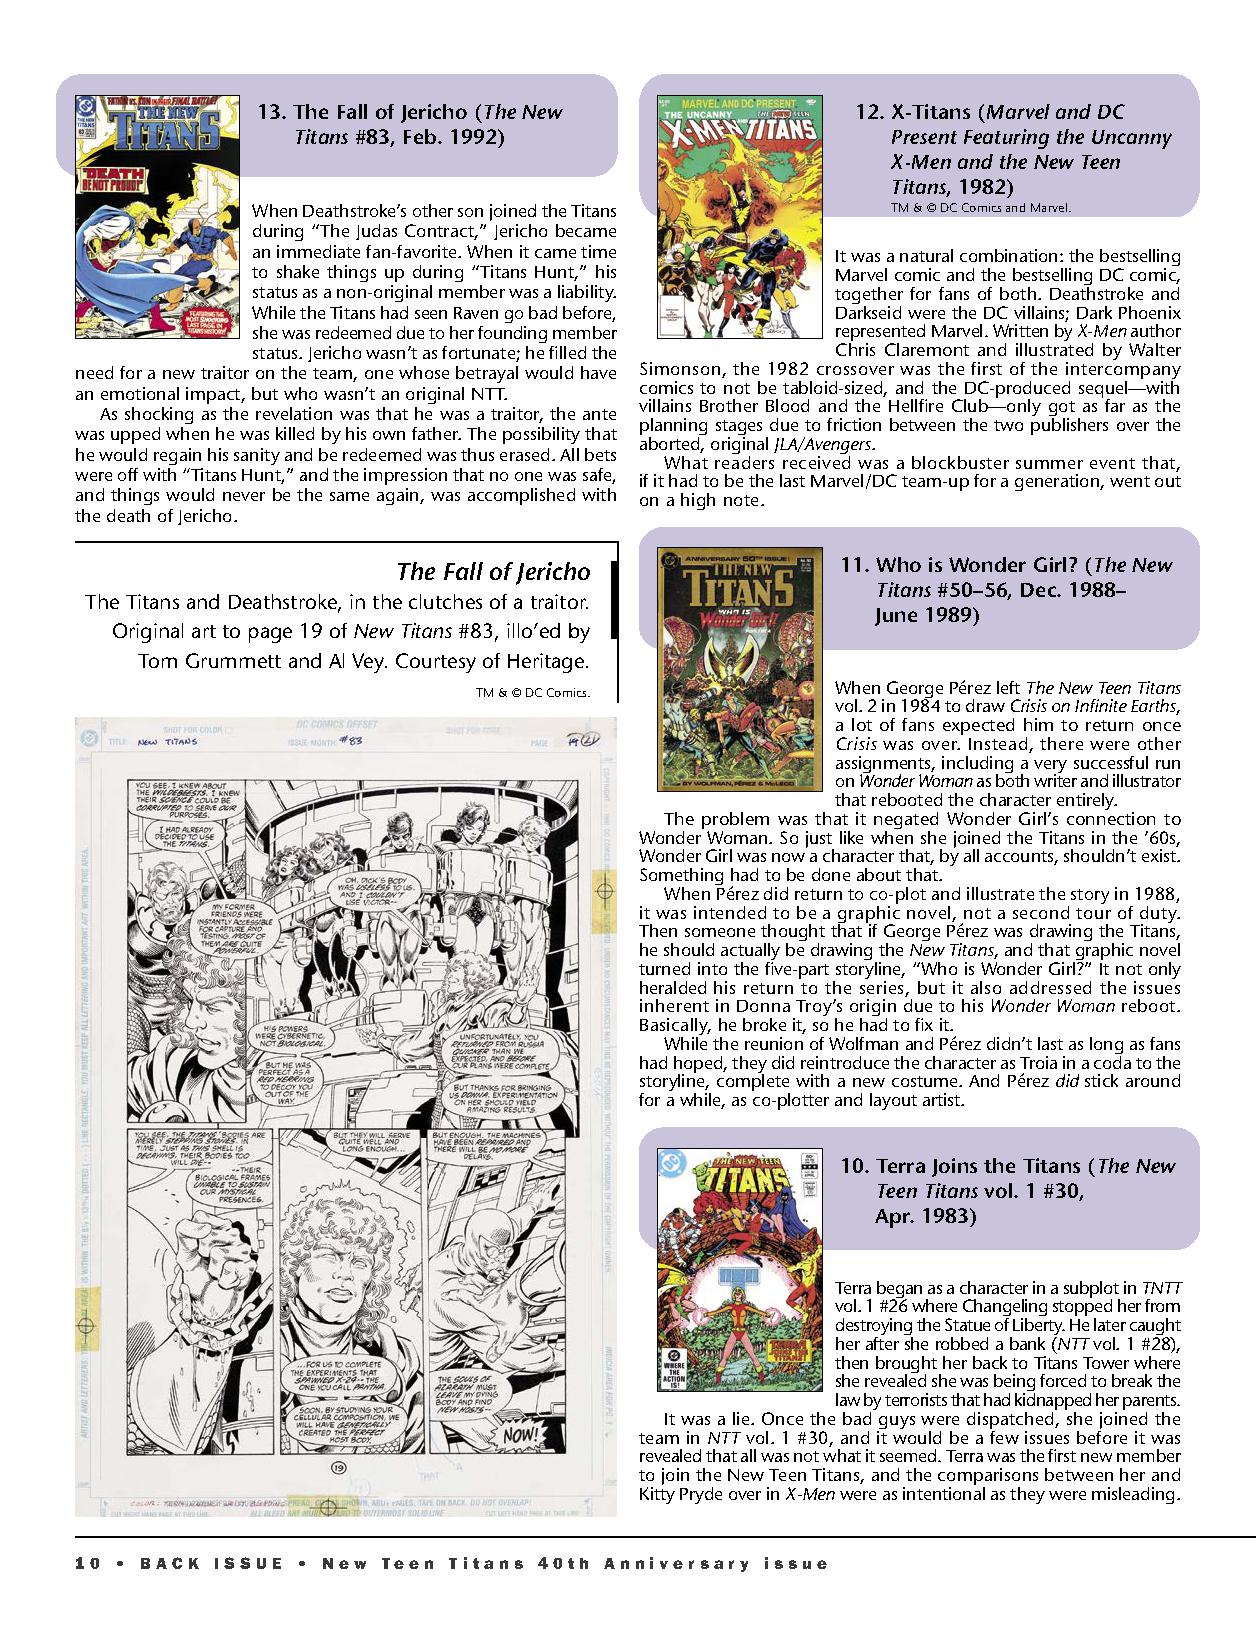 Read online Back Issue comic -  Issue #122 - 12